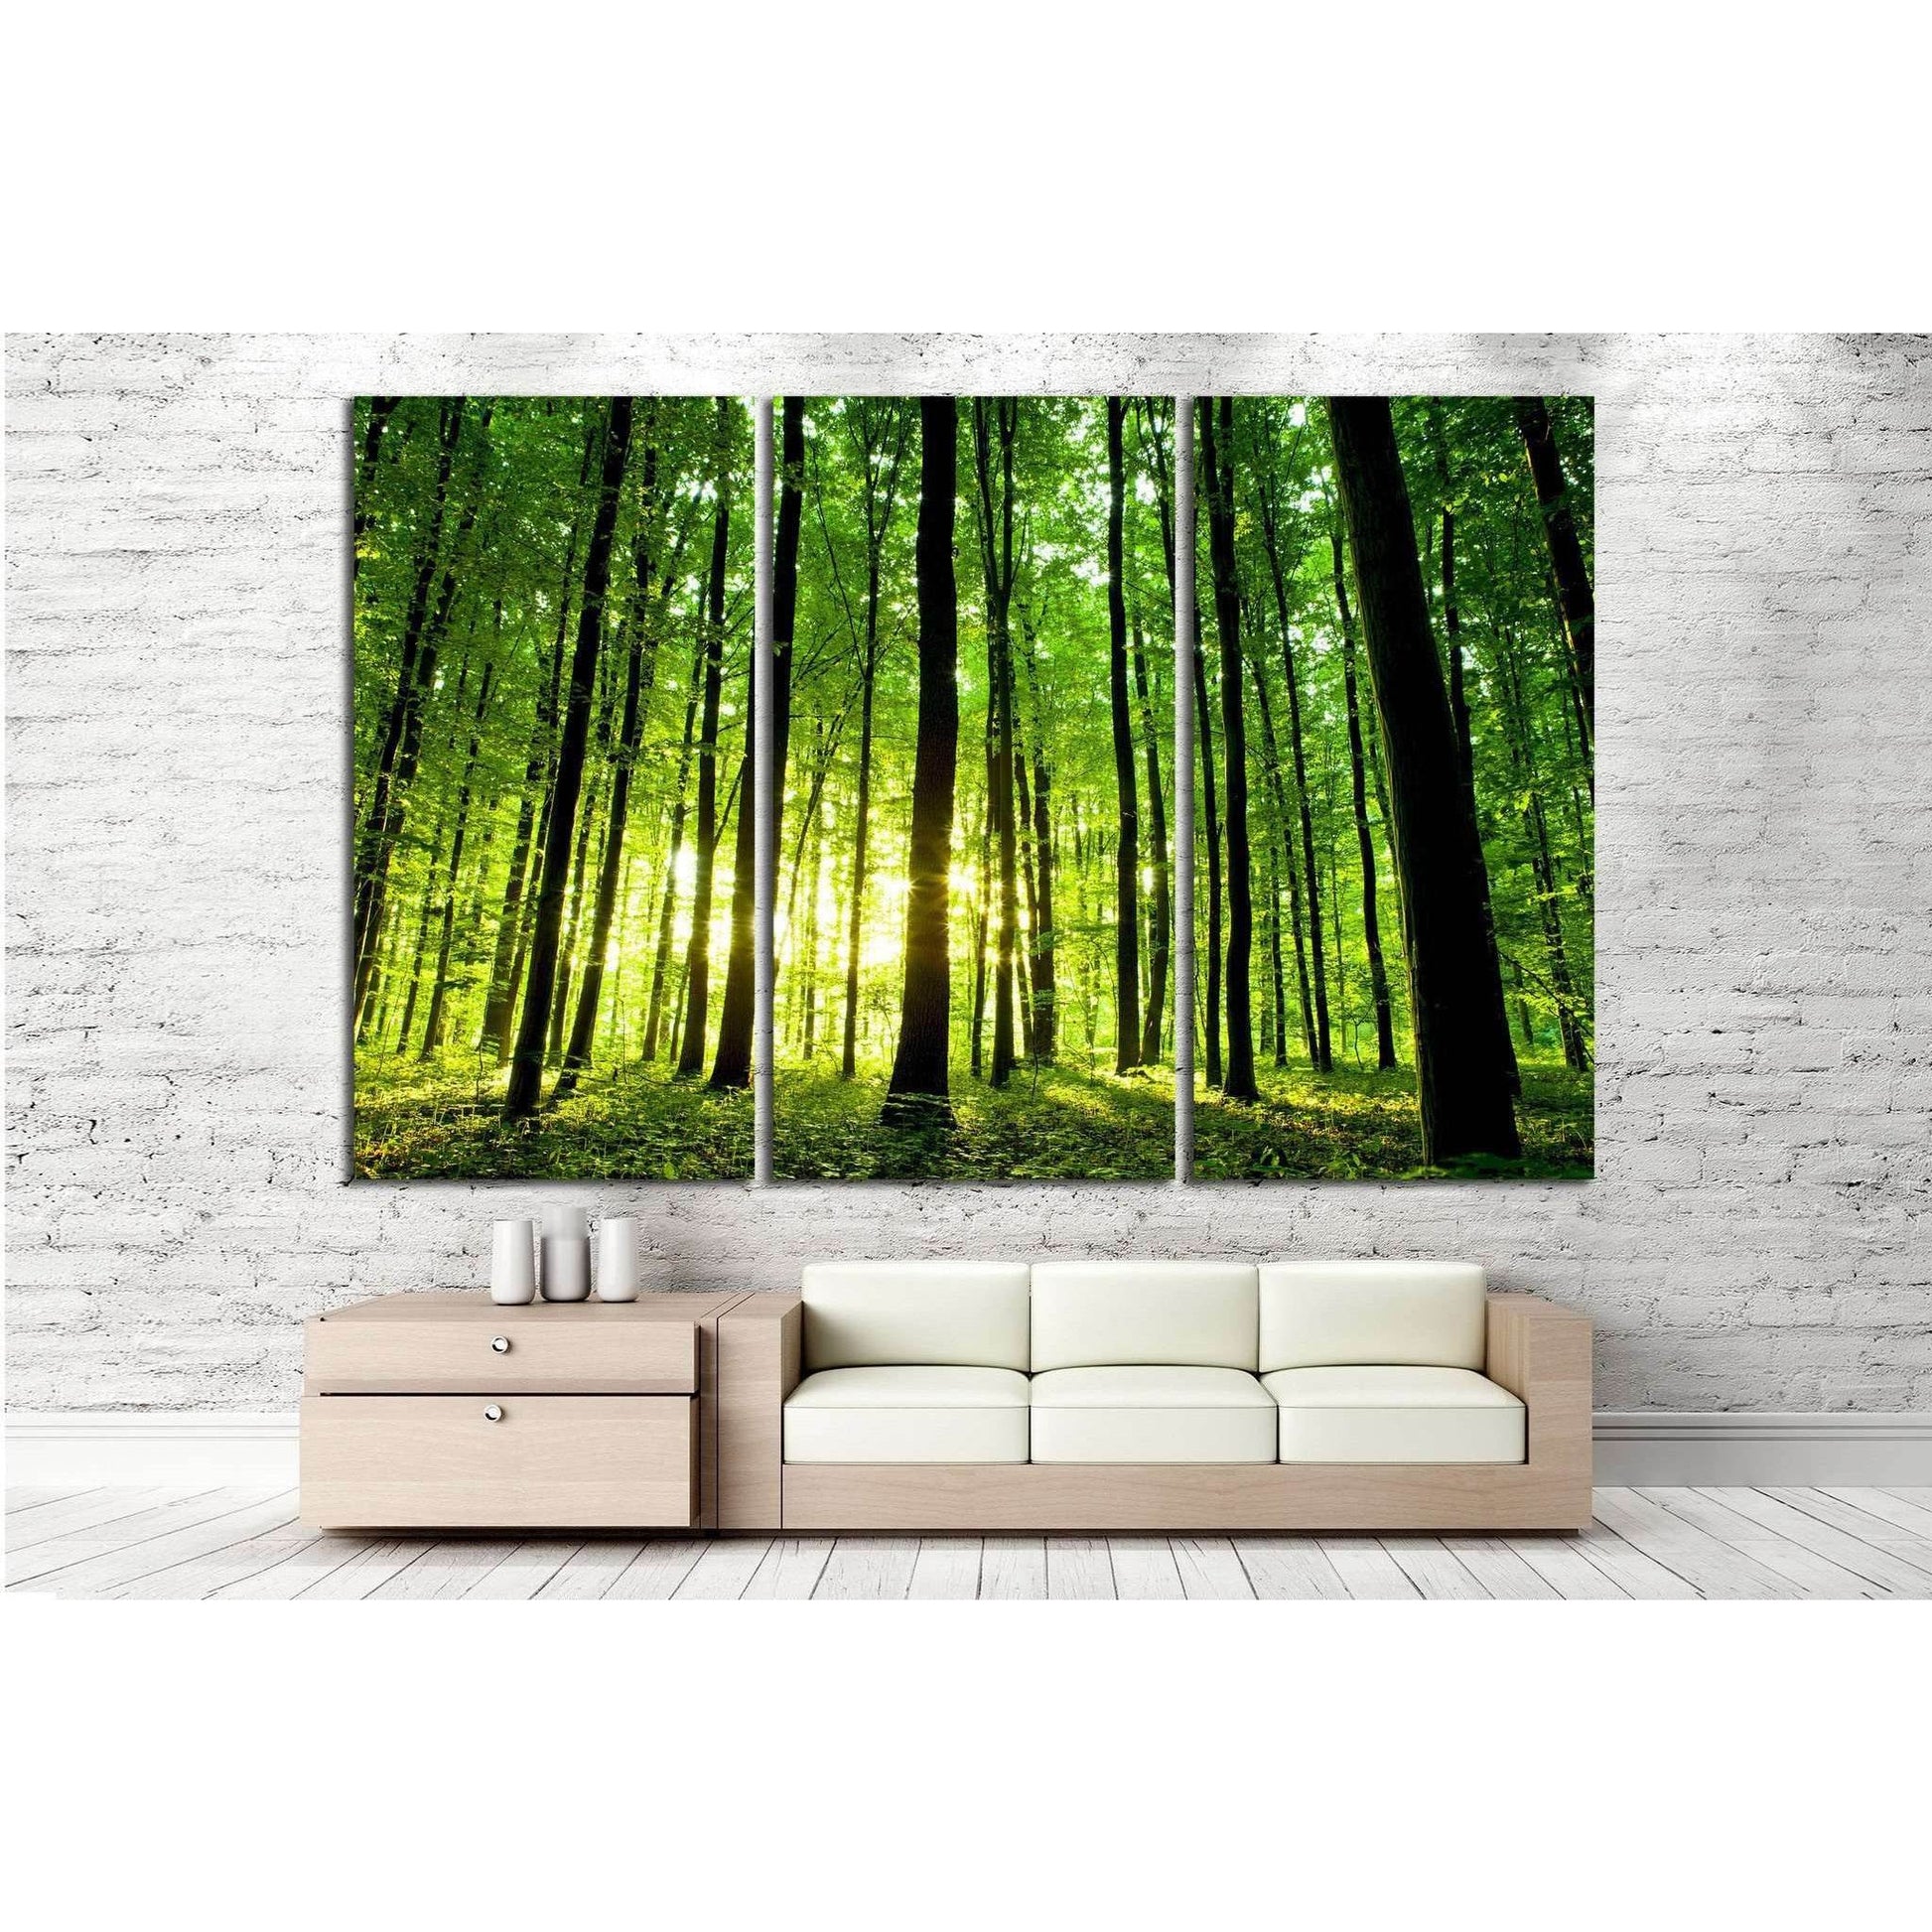 Lively Green Woodland Wall Art for Bright Office SpacesThis canvas print features a sun-drenched forest, offering a lively and refreshing ambiance to any room. Its vibrant greens and sunlit backdrop make it ideal for living rooms or offices looking to add